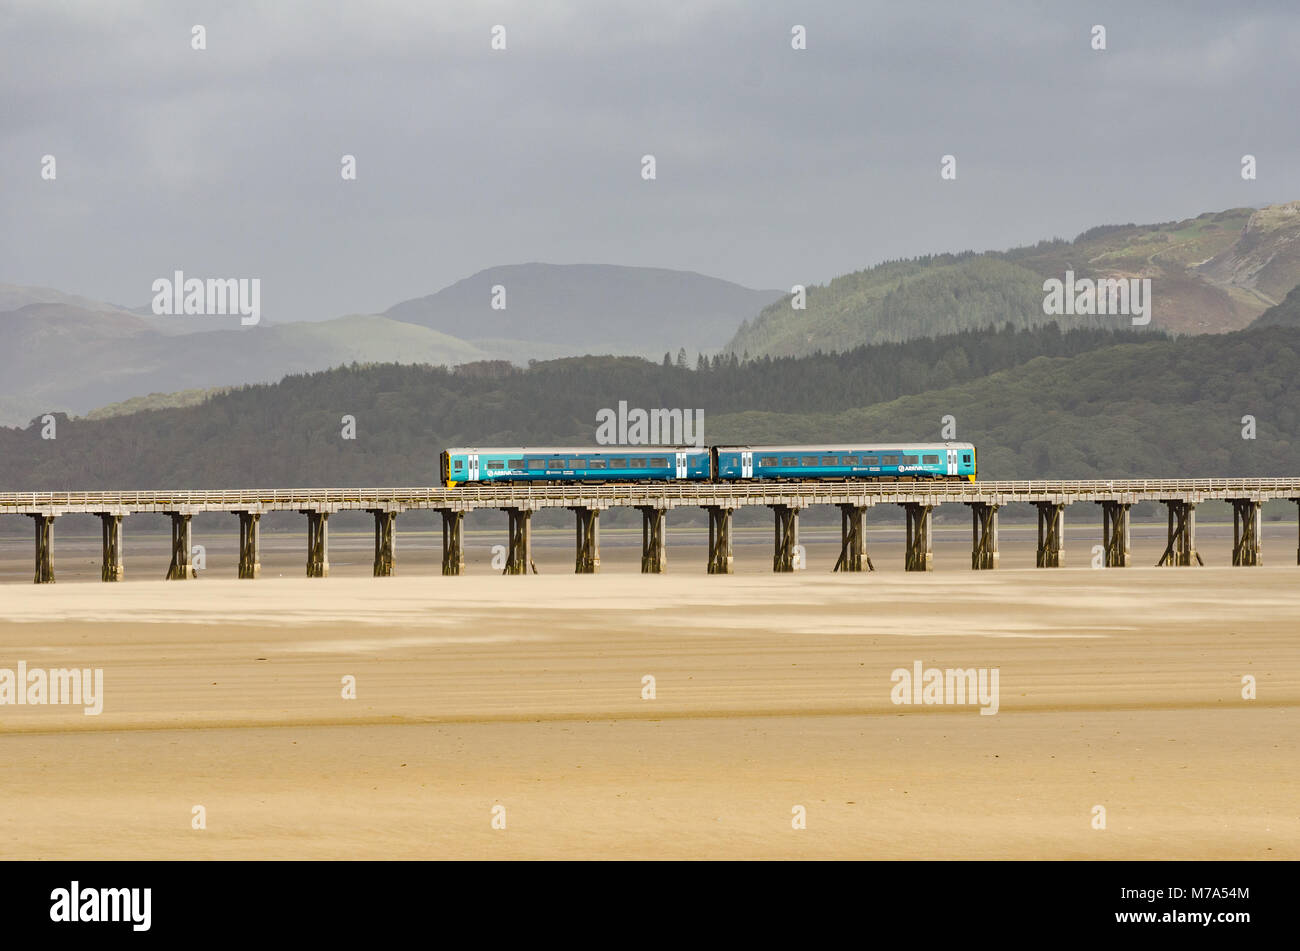 An Arriva Trains Wales train crossing Barmouth Bridge in Wales. Stock Photo